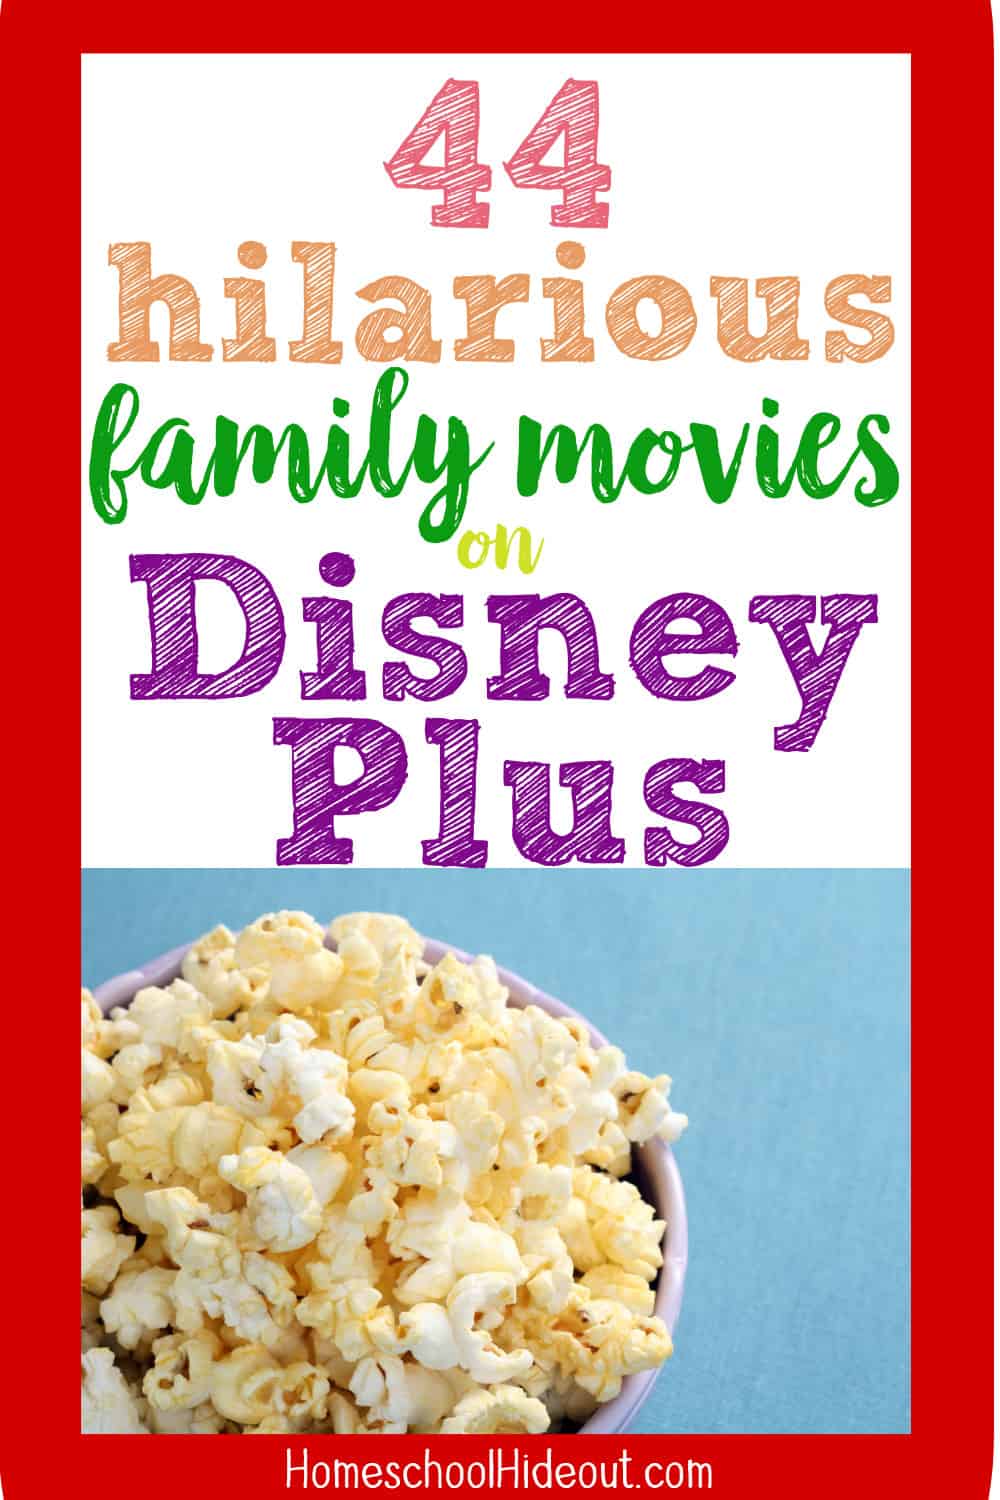 This list of family movies on Disney Plus is EXACTLY what I needed to help me plan our next family movie night! Add some snacks and we'll be set to go!